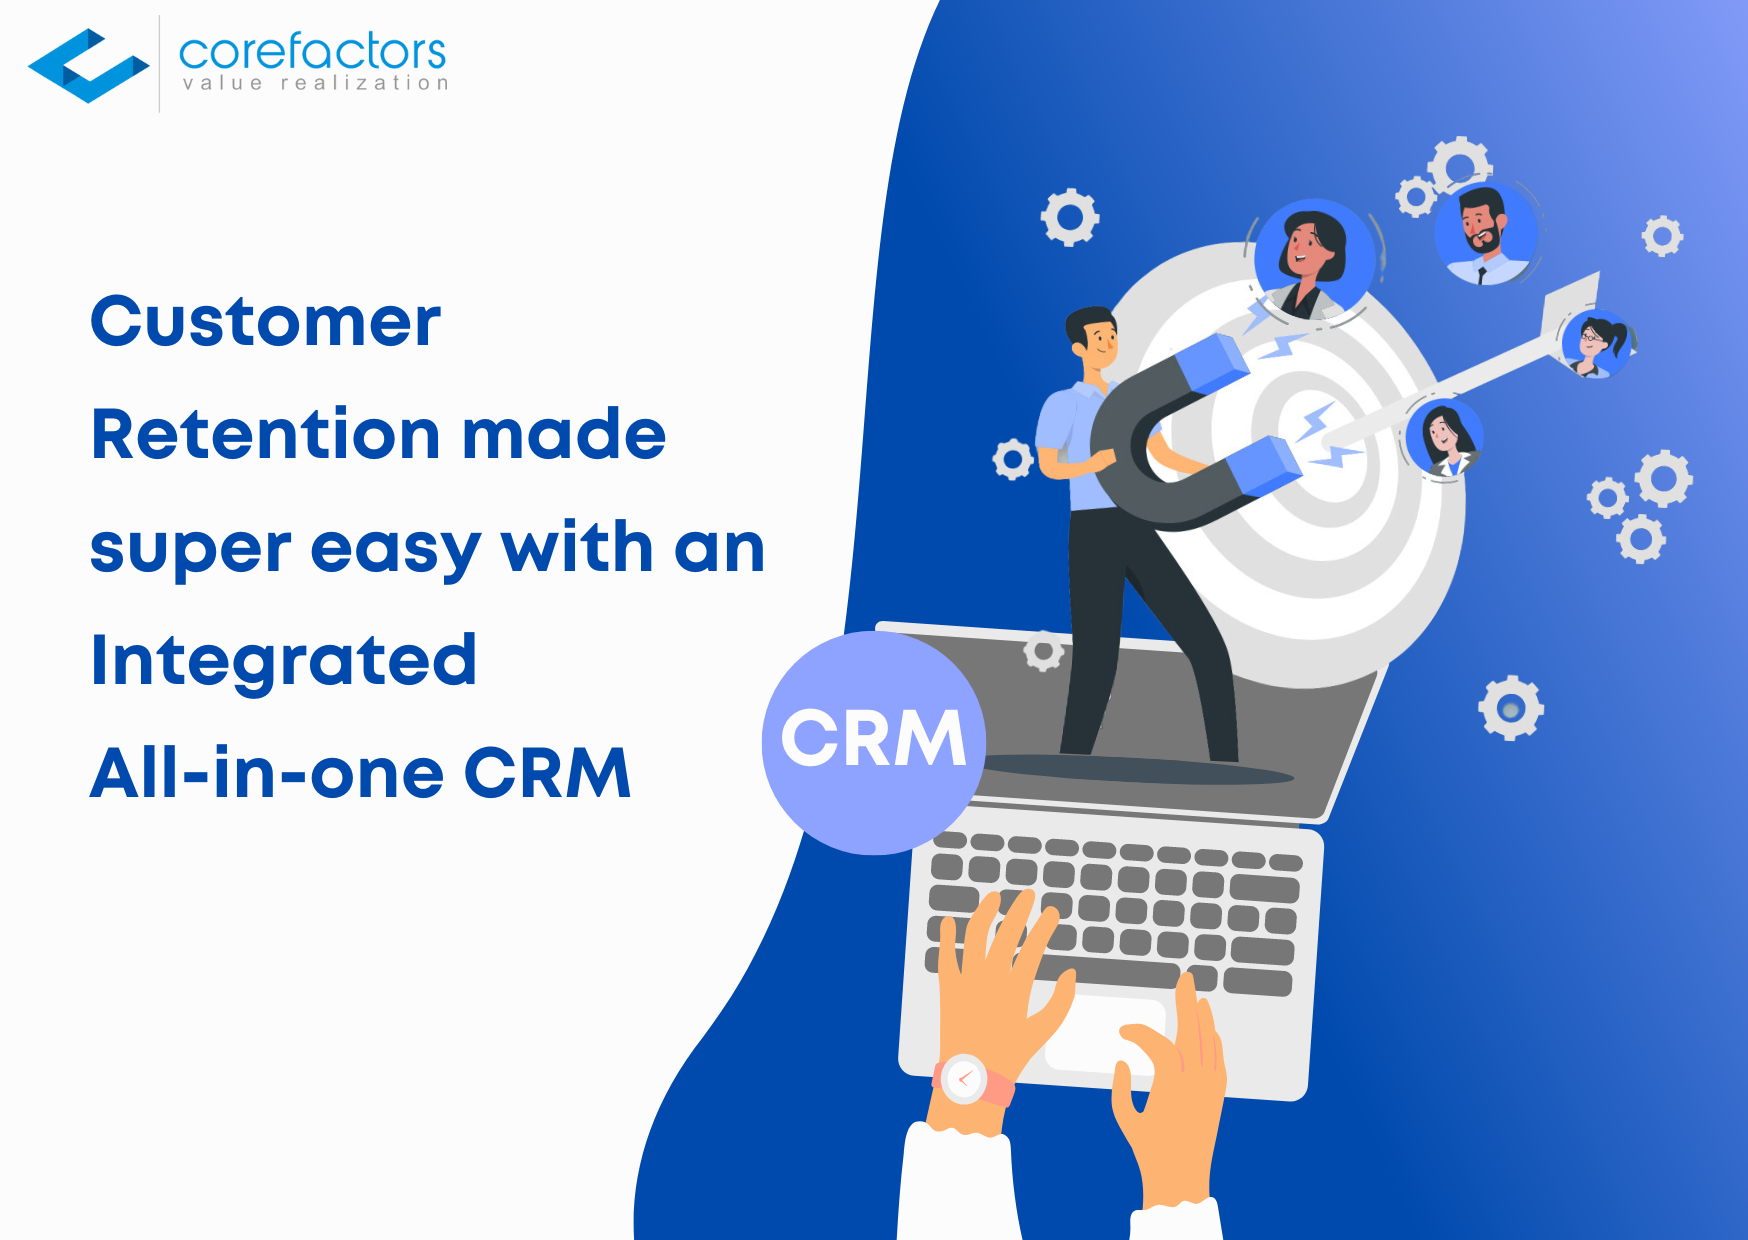 How an Integrated All-in-one CRM makes Customer Retention easy?